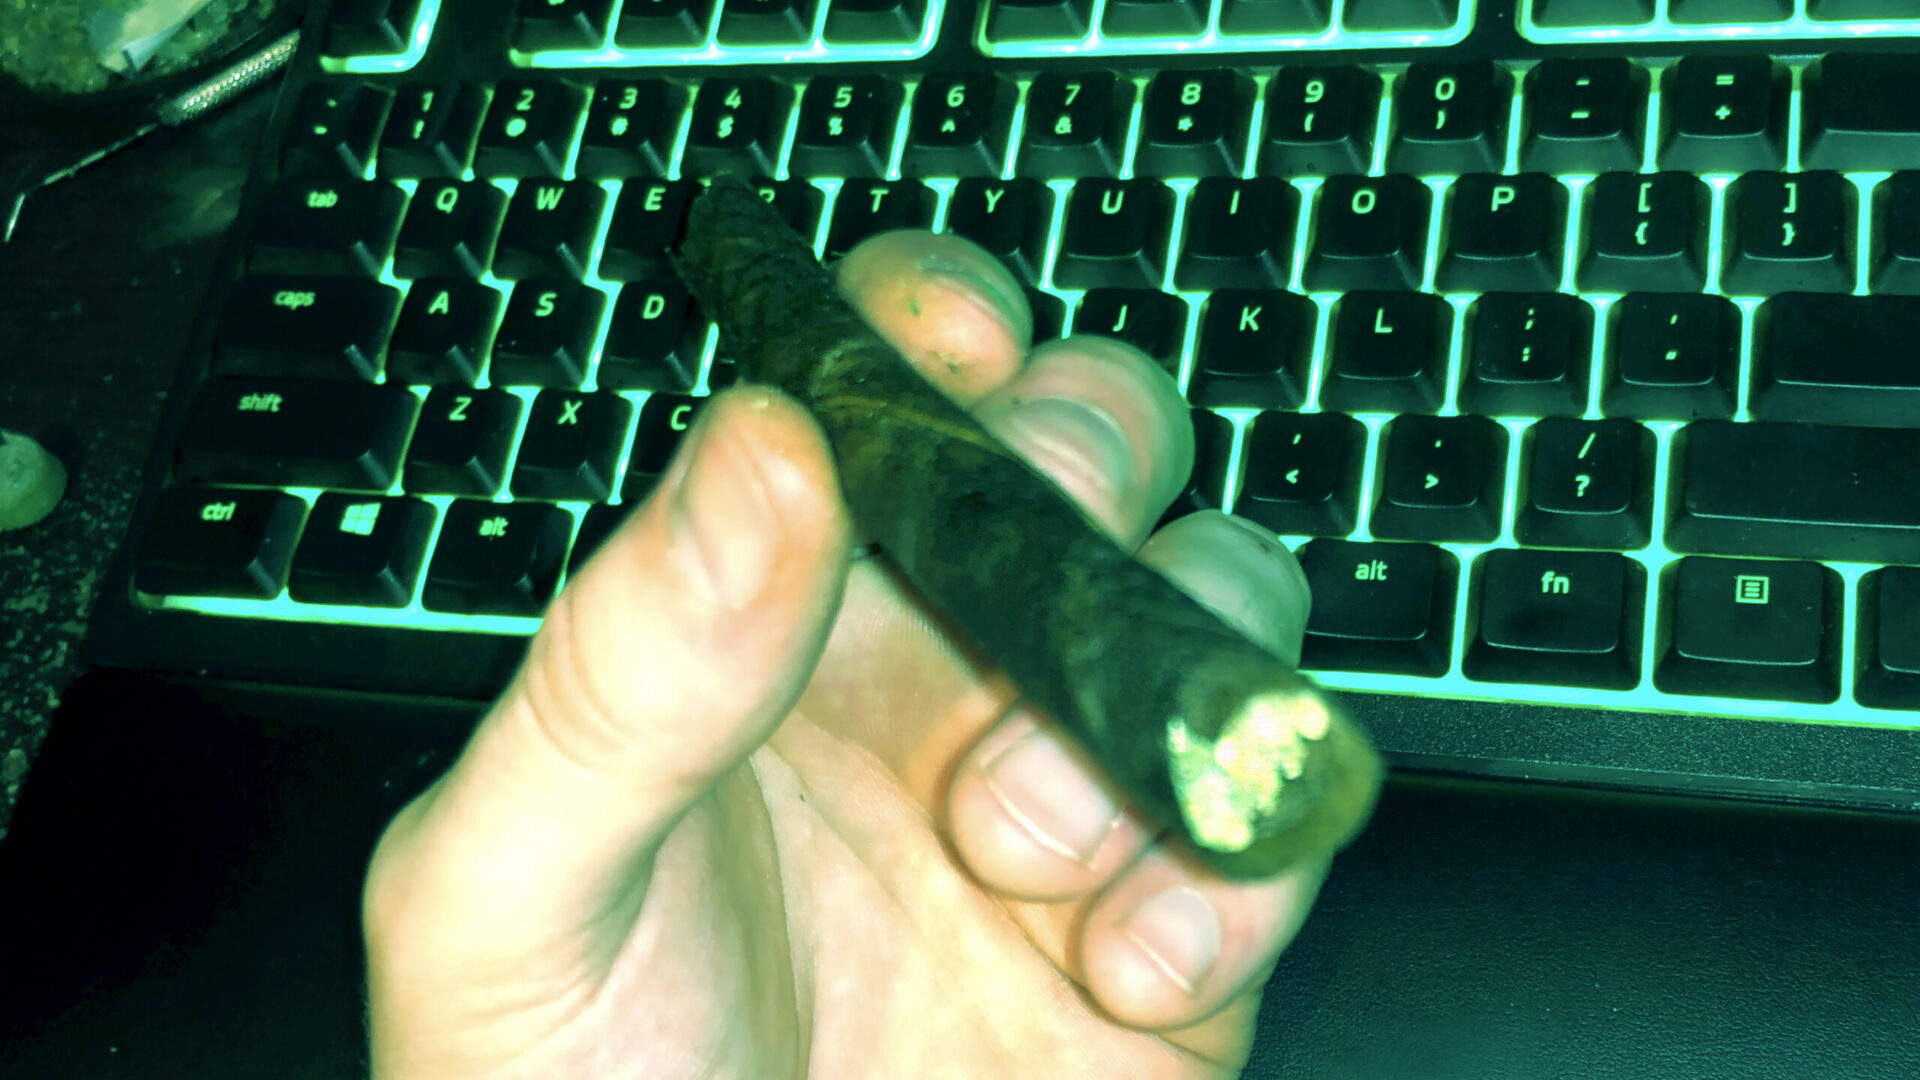 the final product of the acapulco gold backwood blunt